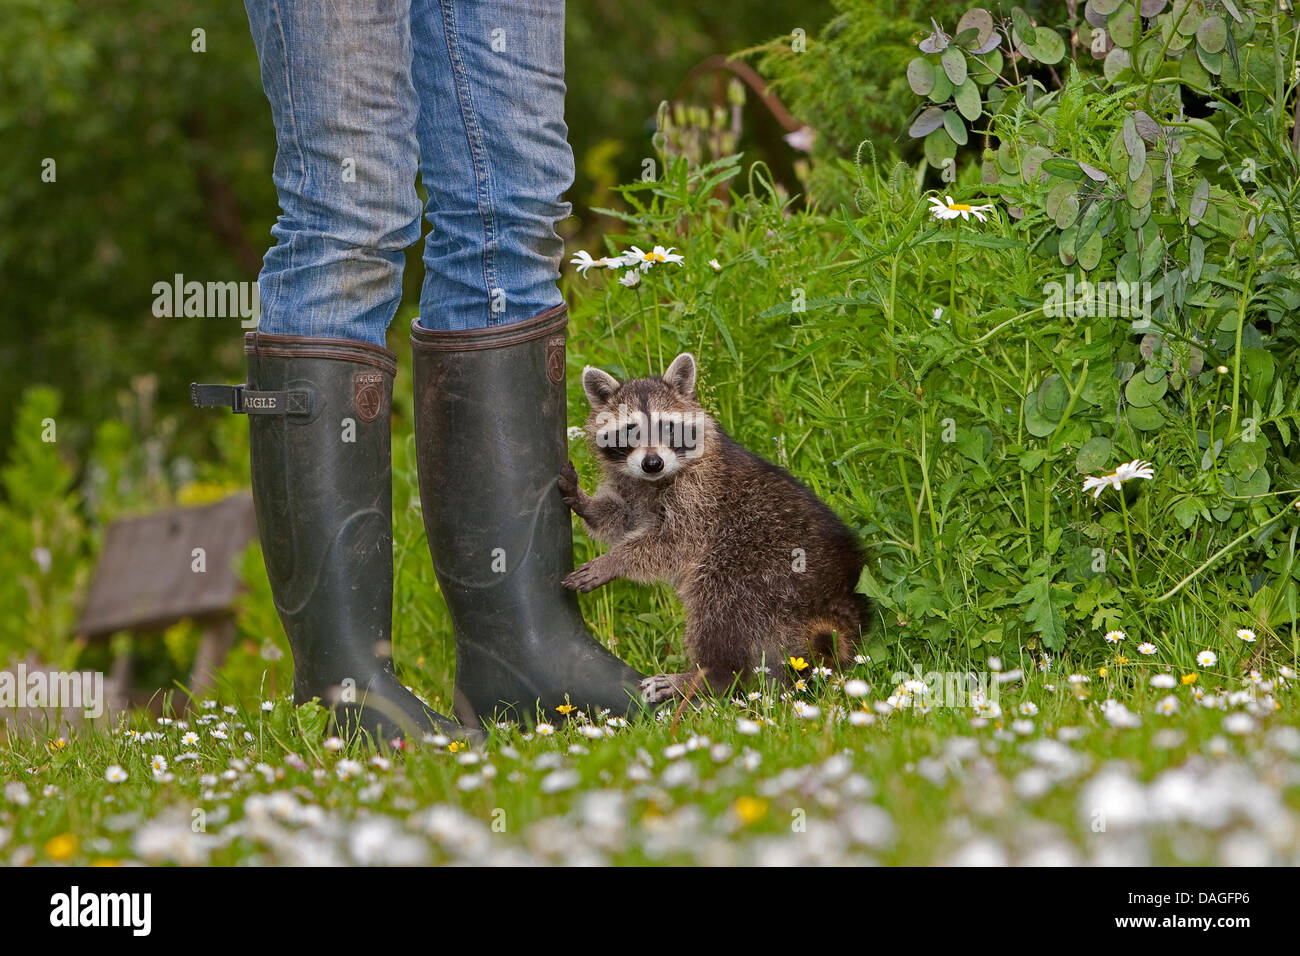 common raccoon (Procyon lotor), young animal standing with a girl wearing rubber boots in a meadow, Germany Stock Photo